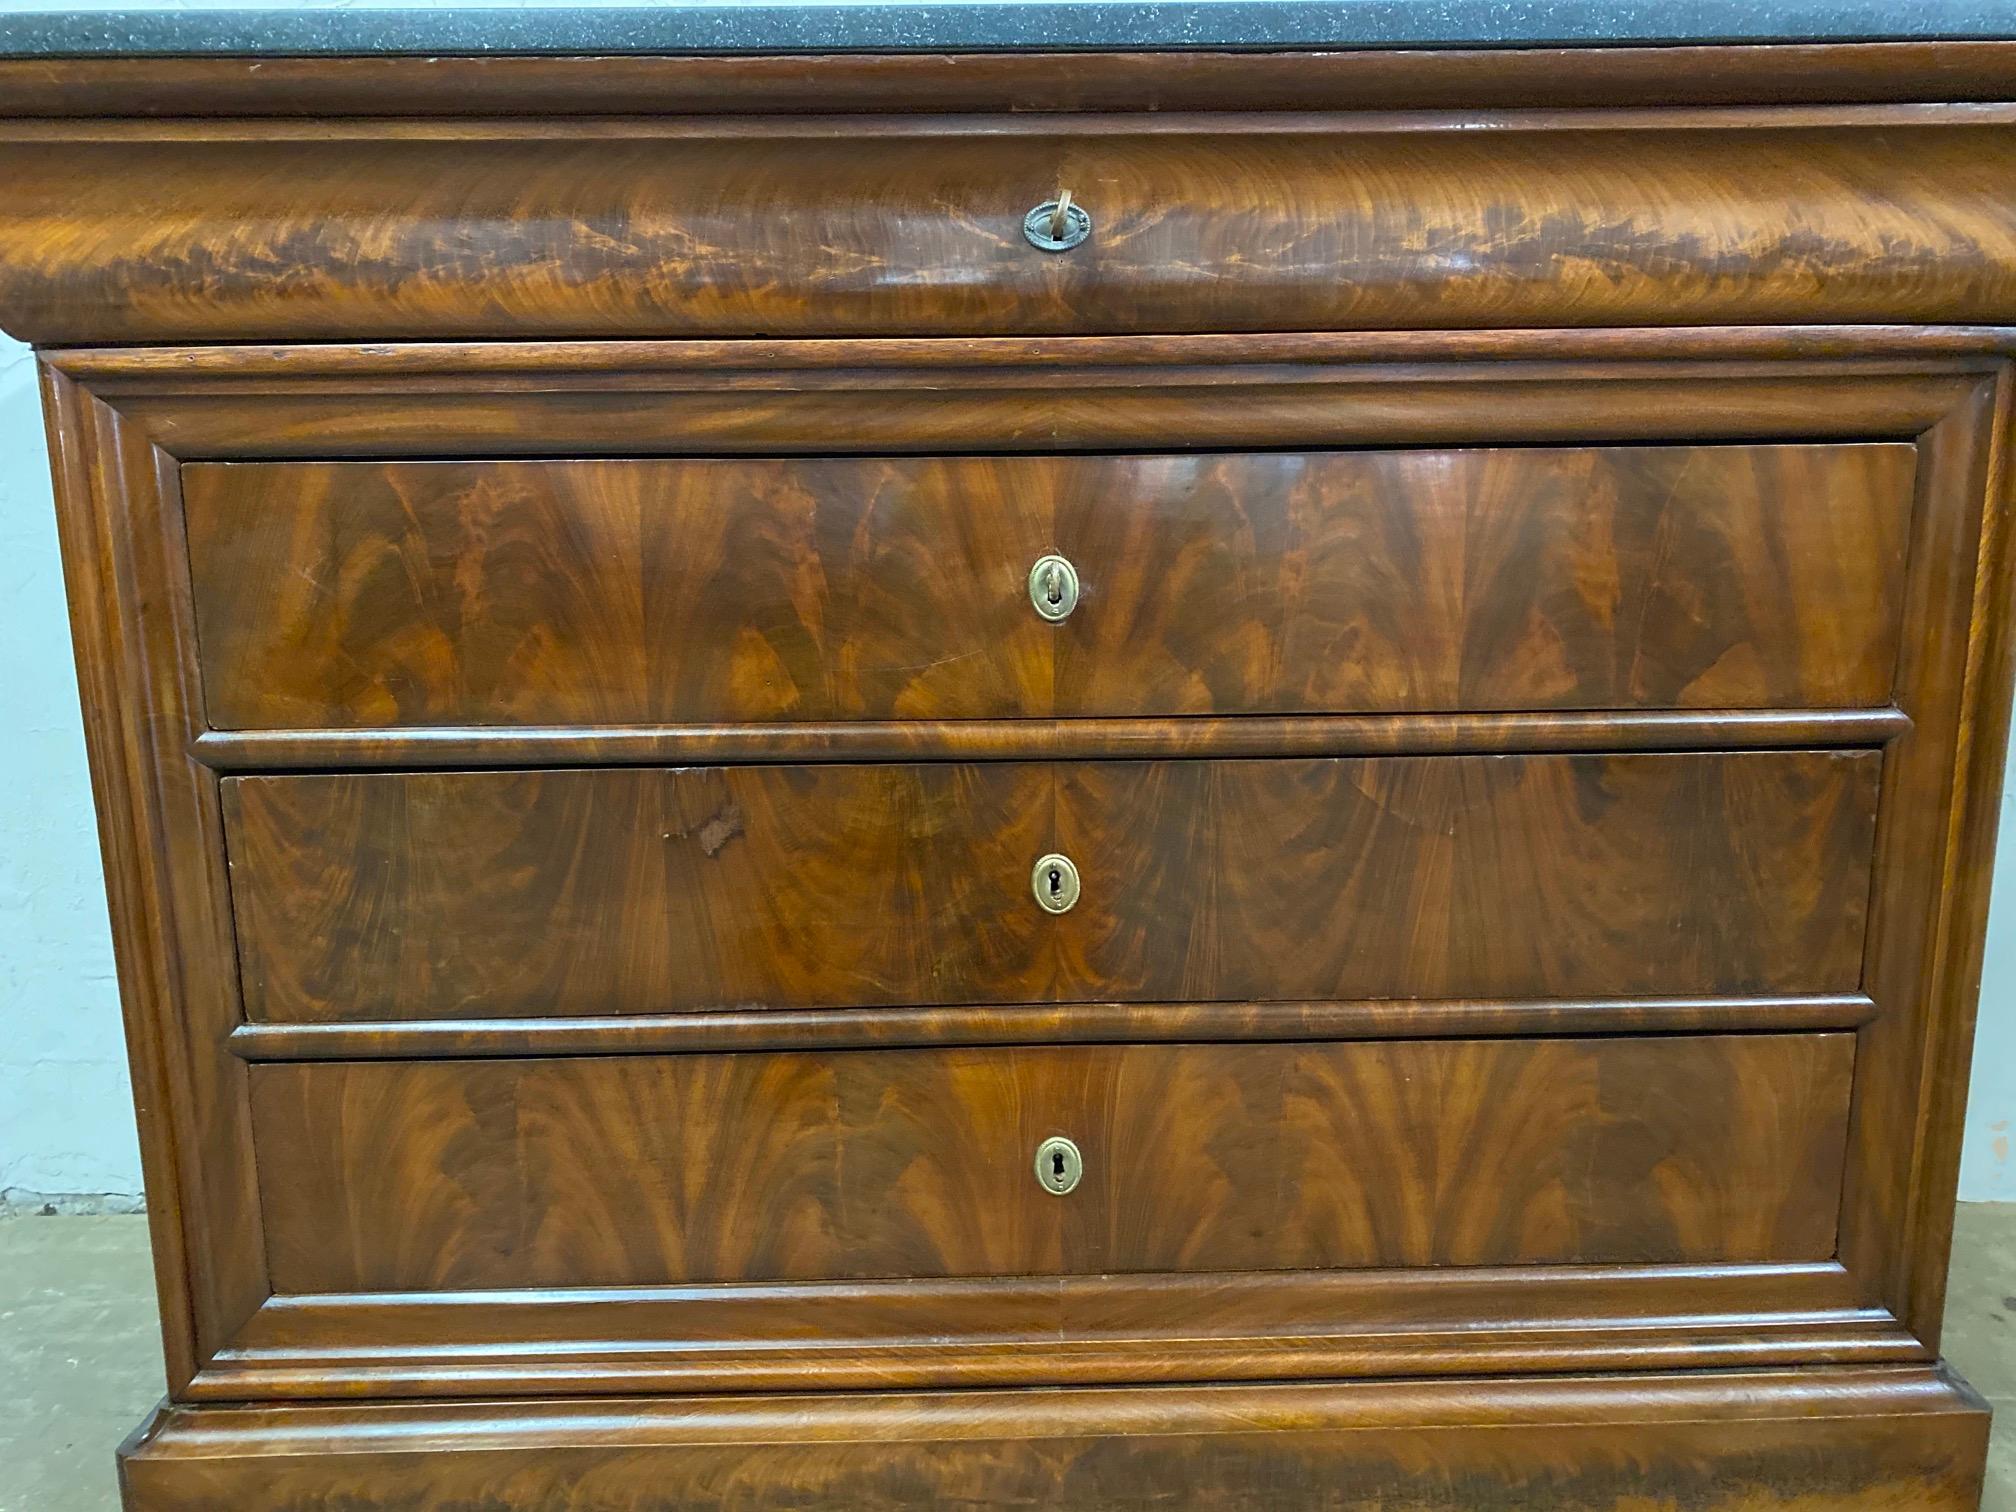 A fine 19th century Louis Philippe chest of drawers with black granite top, 4 drawers plus one hidden base drawer. This elegant and restrained Louis Philippe flame mahogany four-drawer commode, circa 1840s has book-matched veneer. The simple